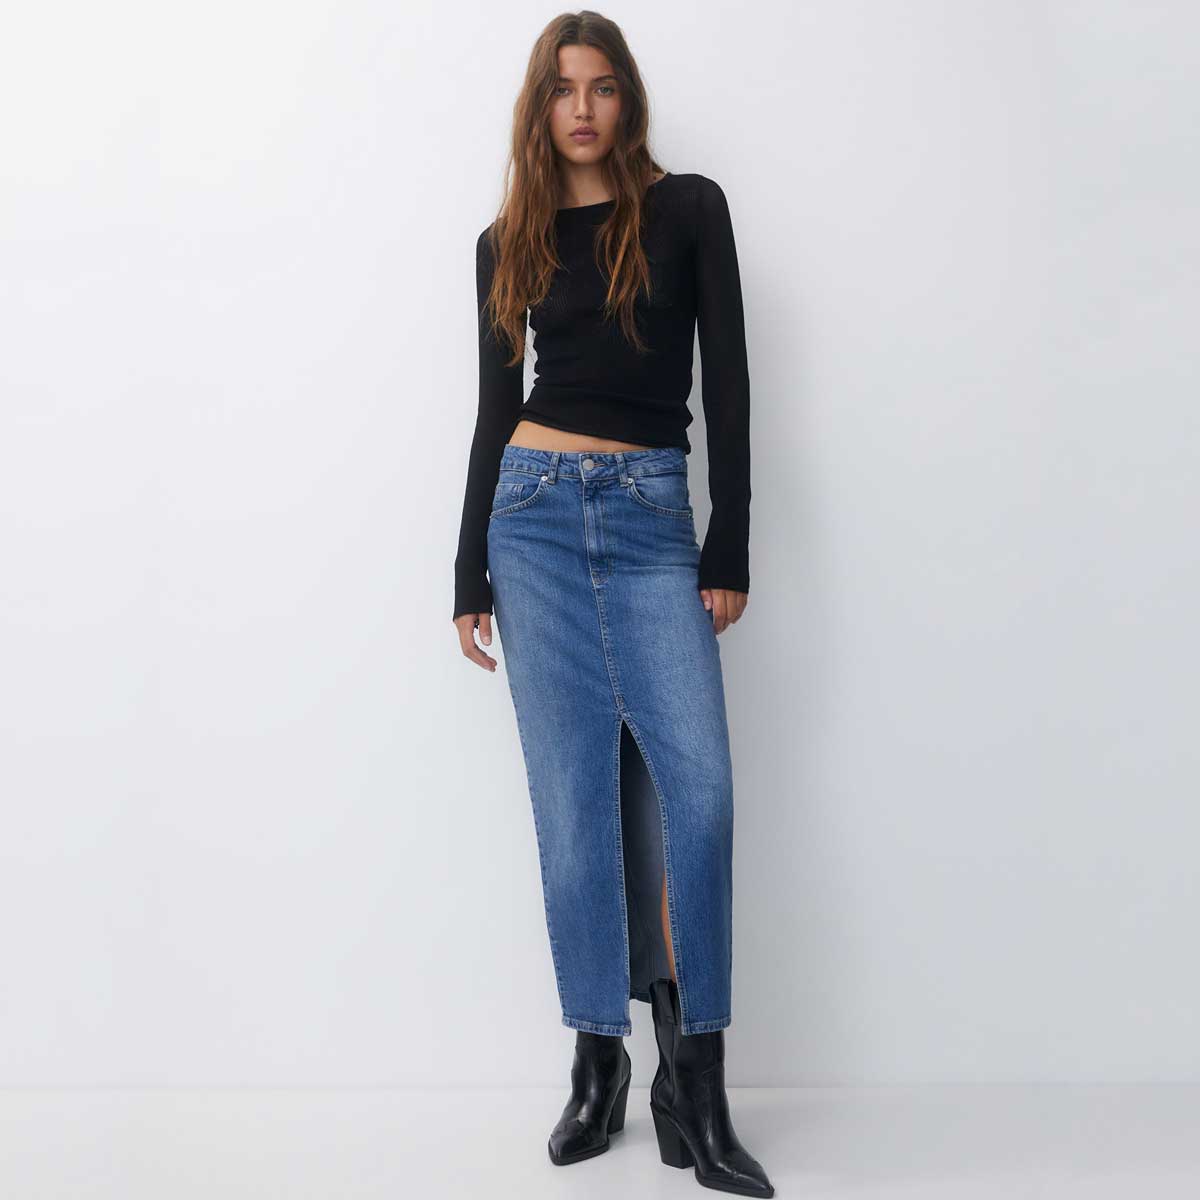 gonne jeans autunno 